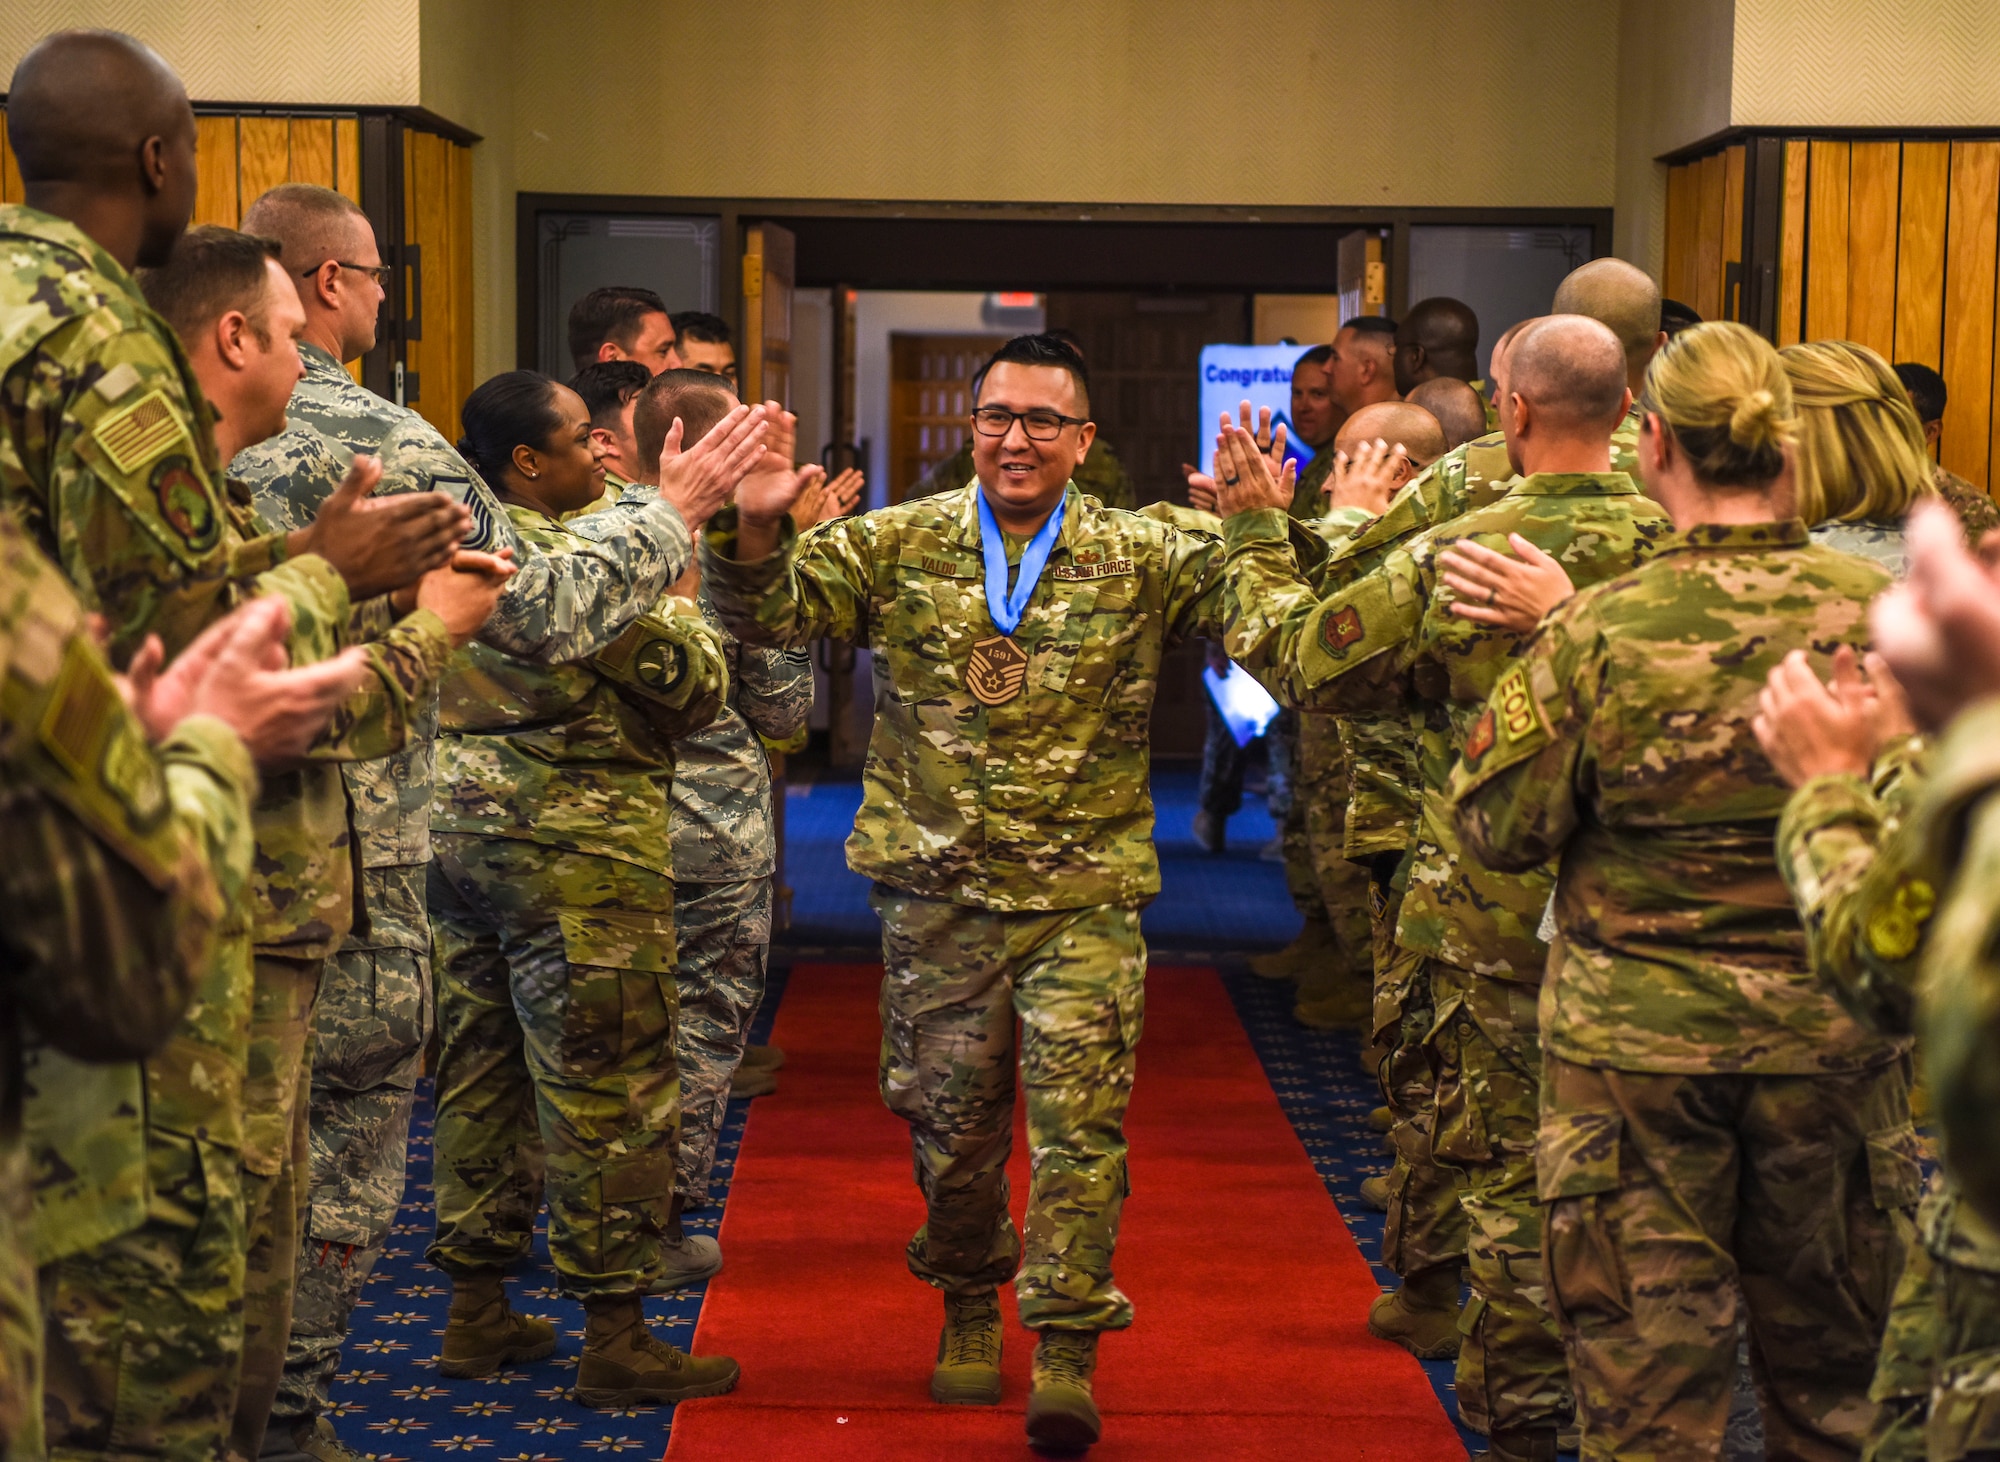 Master Sgt.-select Kendrick Valdo, 377th Air Base Wing Plans NCOIC, walks a gauntlet of high fives May 23, 2019, at the Mountain View Club here. Valdo was celebrating with dozens of selectees at the master sergeant release party. (U.S. Air Force photo by Senior Airman Eli Chevalier)